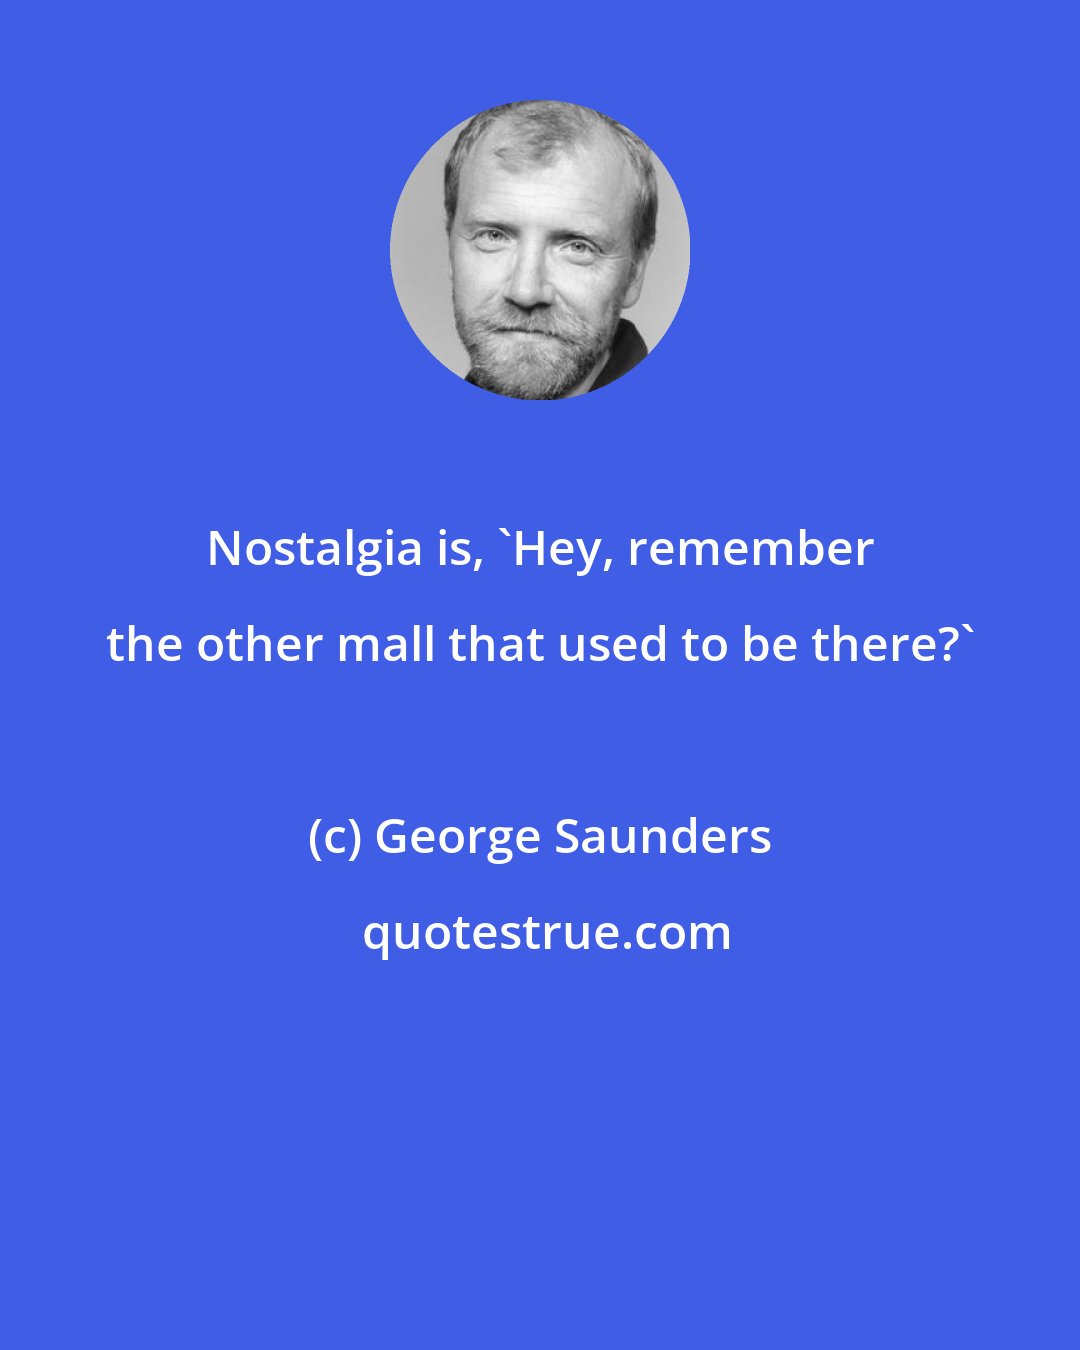 George Saunders: Nostalgia is, 'Hey, remember the other mall that used to be there?'